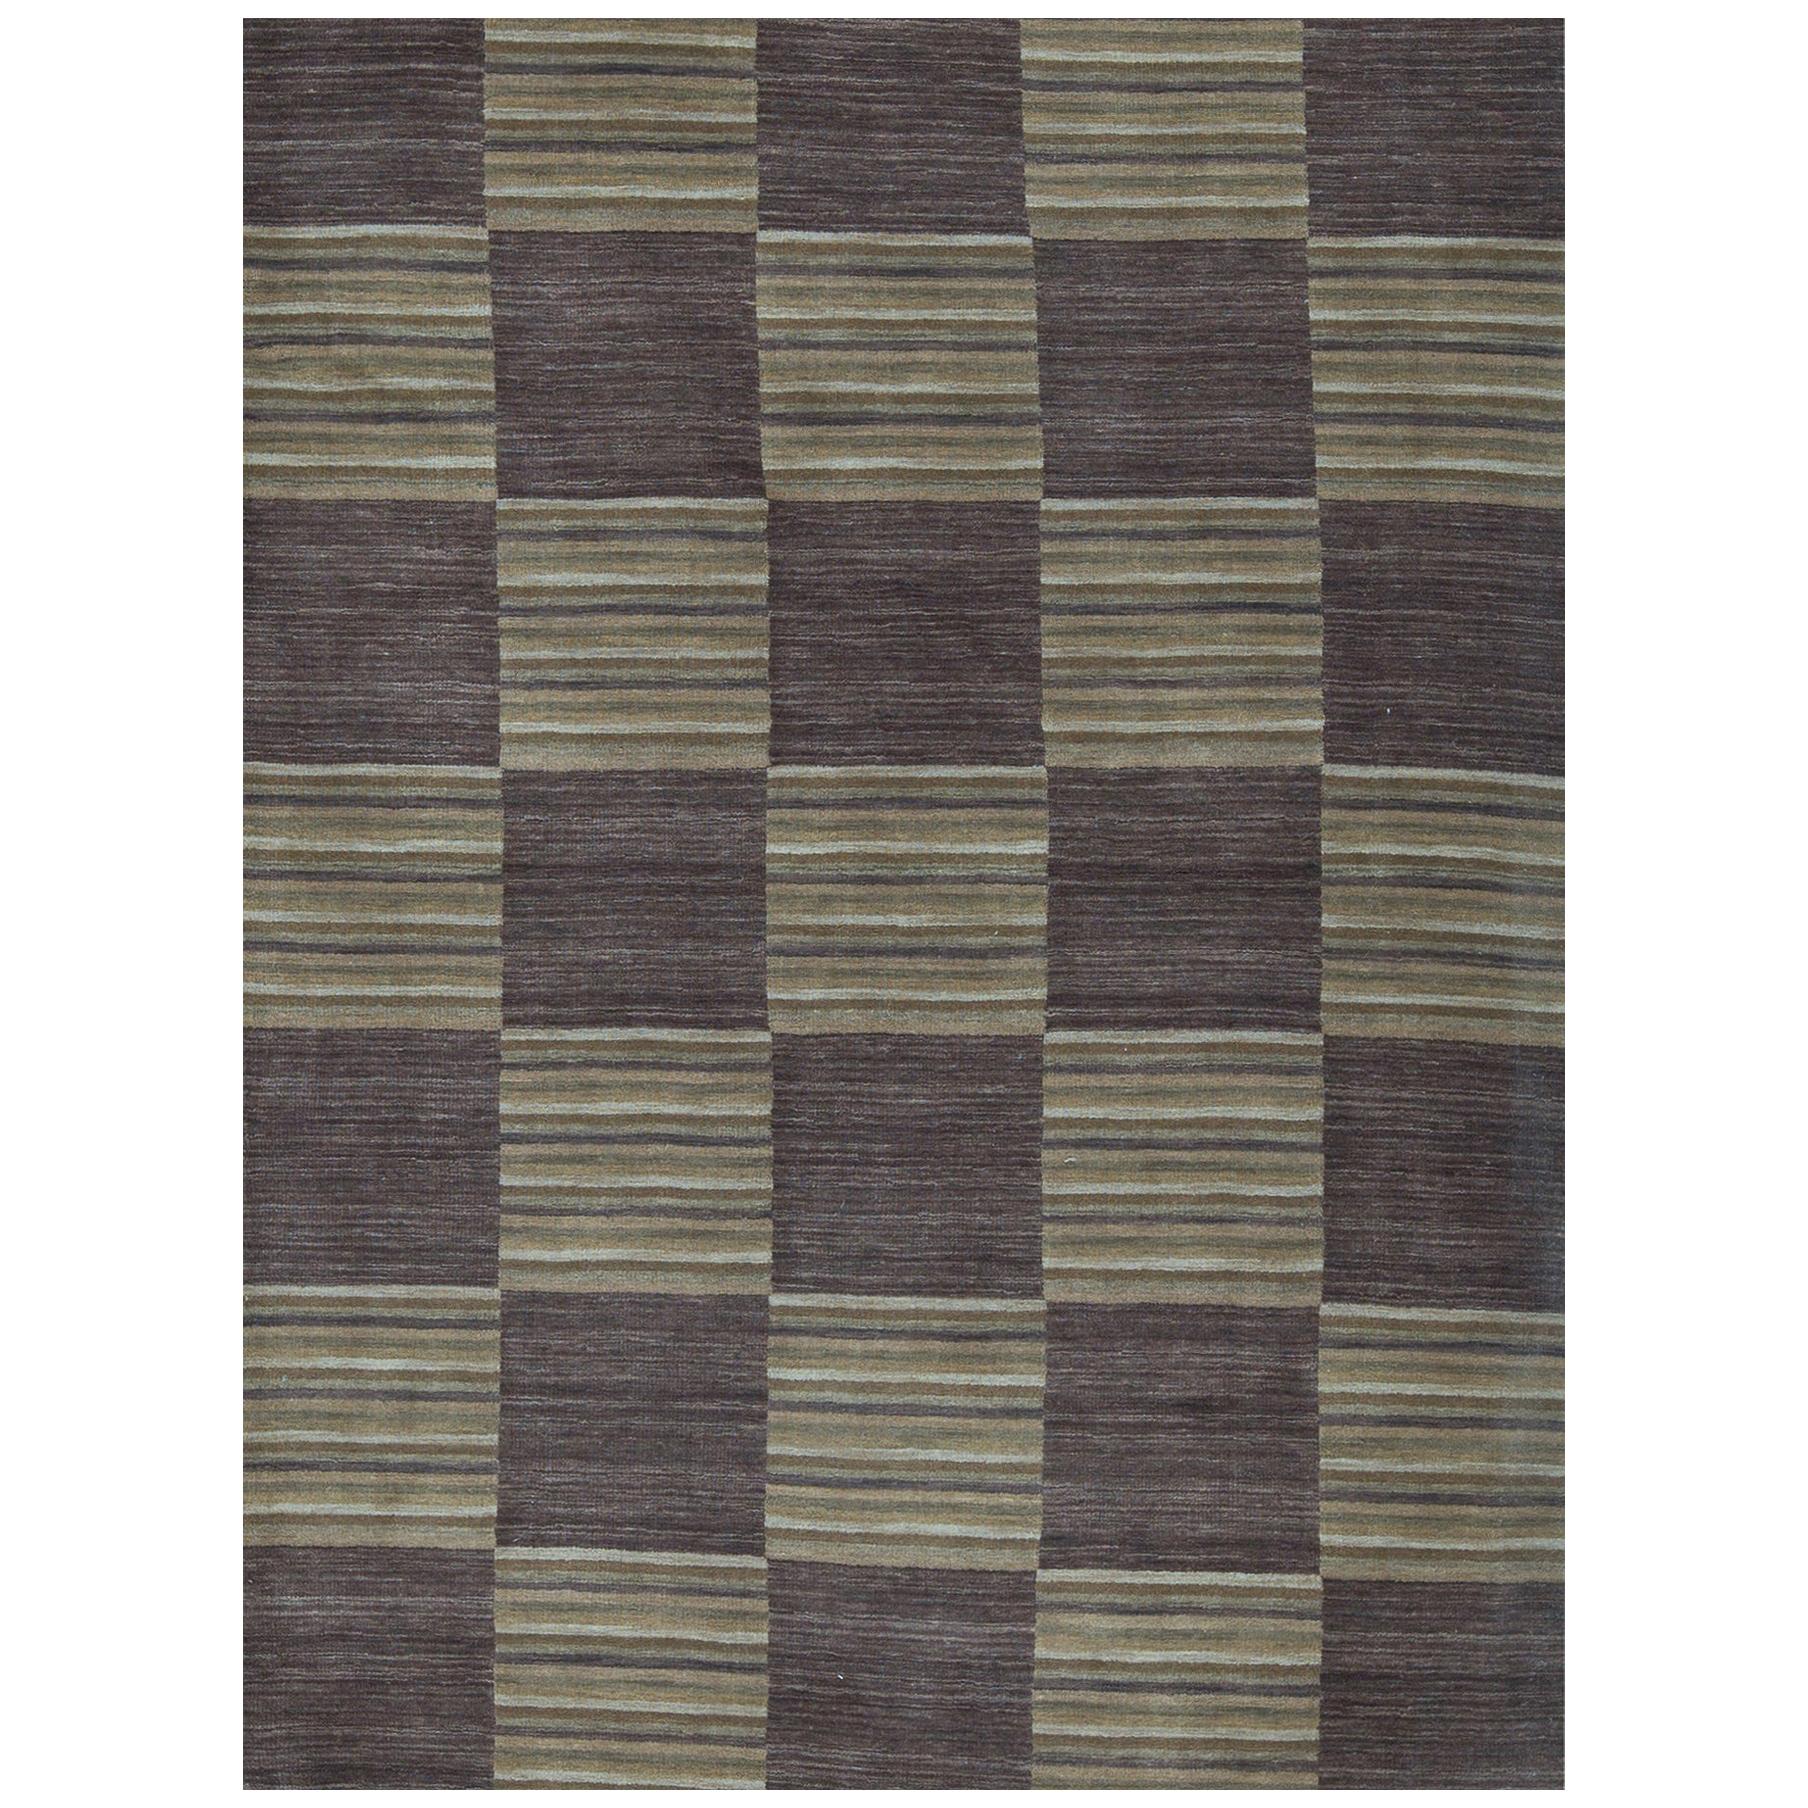 One-of-a-Kind Contemporary Handwoven Wool Area Rug 5'2” x 7'2".